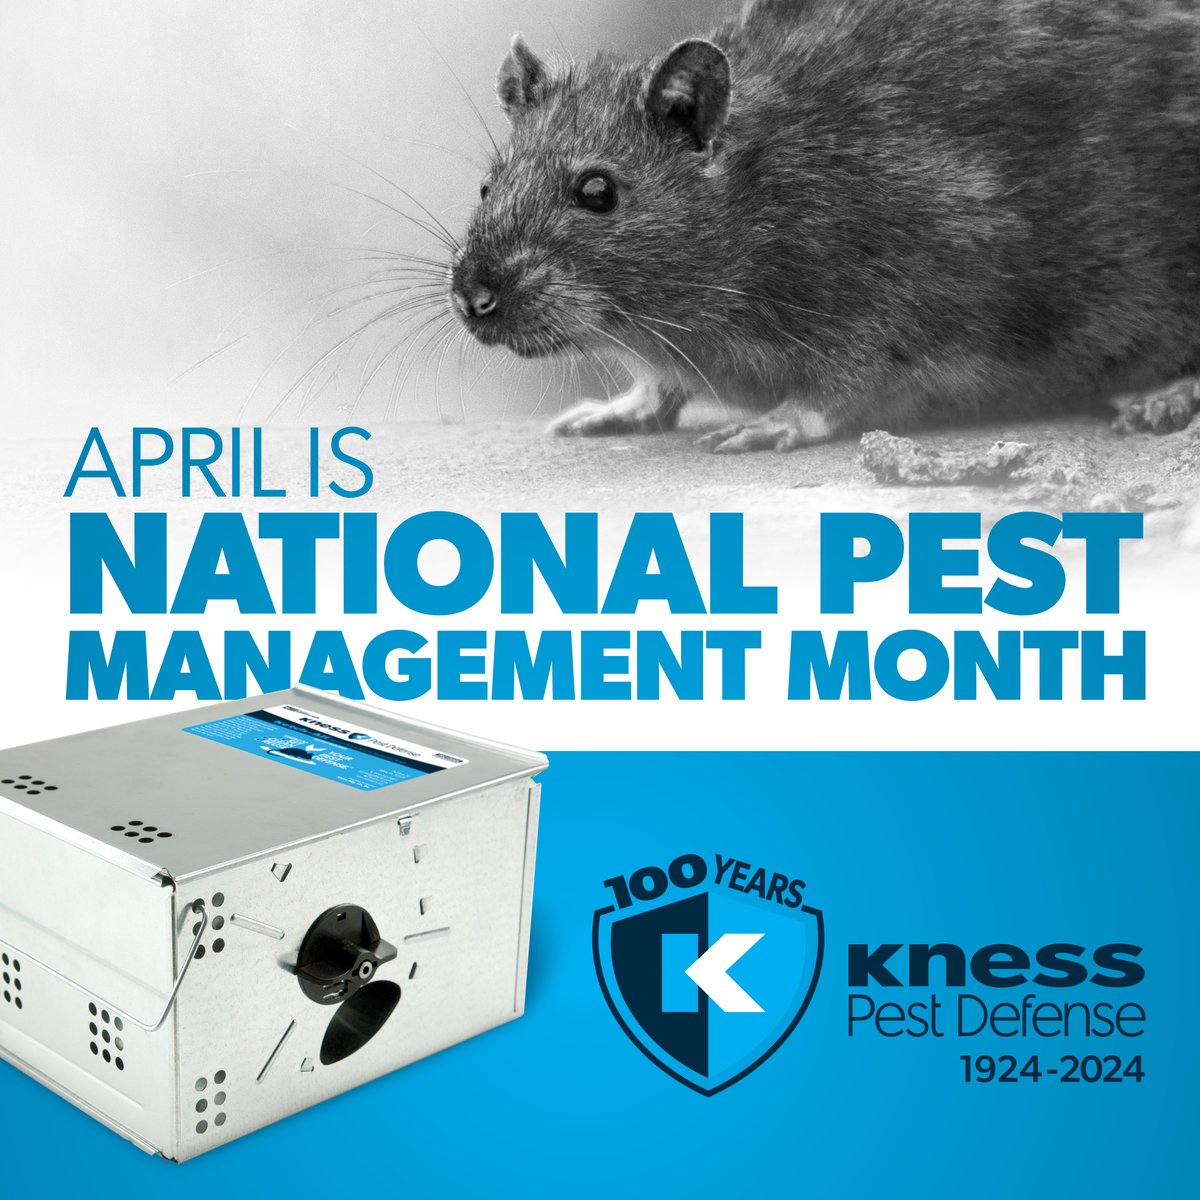 PMPs, thank you for all that you do to help maintain the health and safety of our environments! Happy Nation Pest Management Month!

#NPMM
#PestManagement
#KnessPestDefense